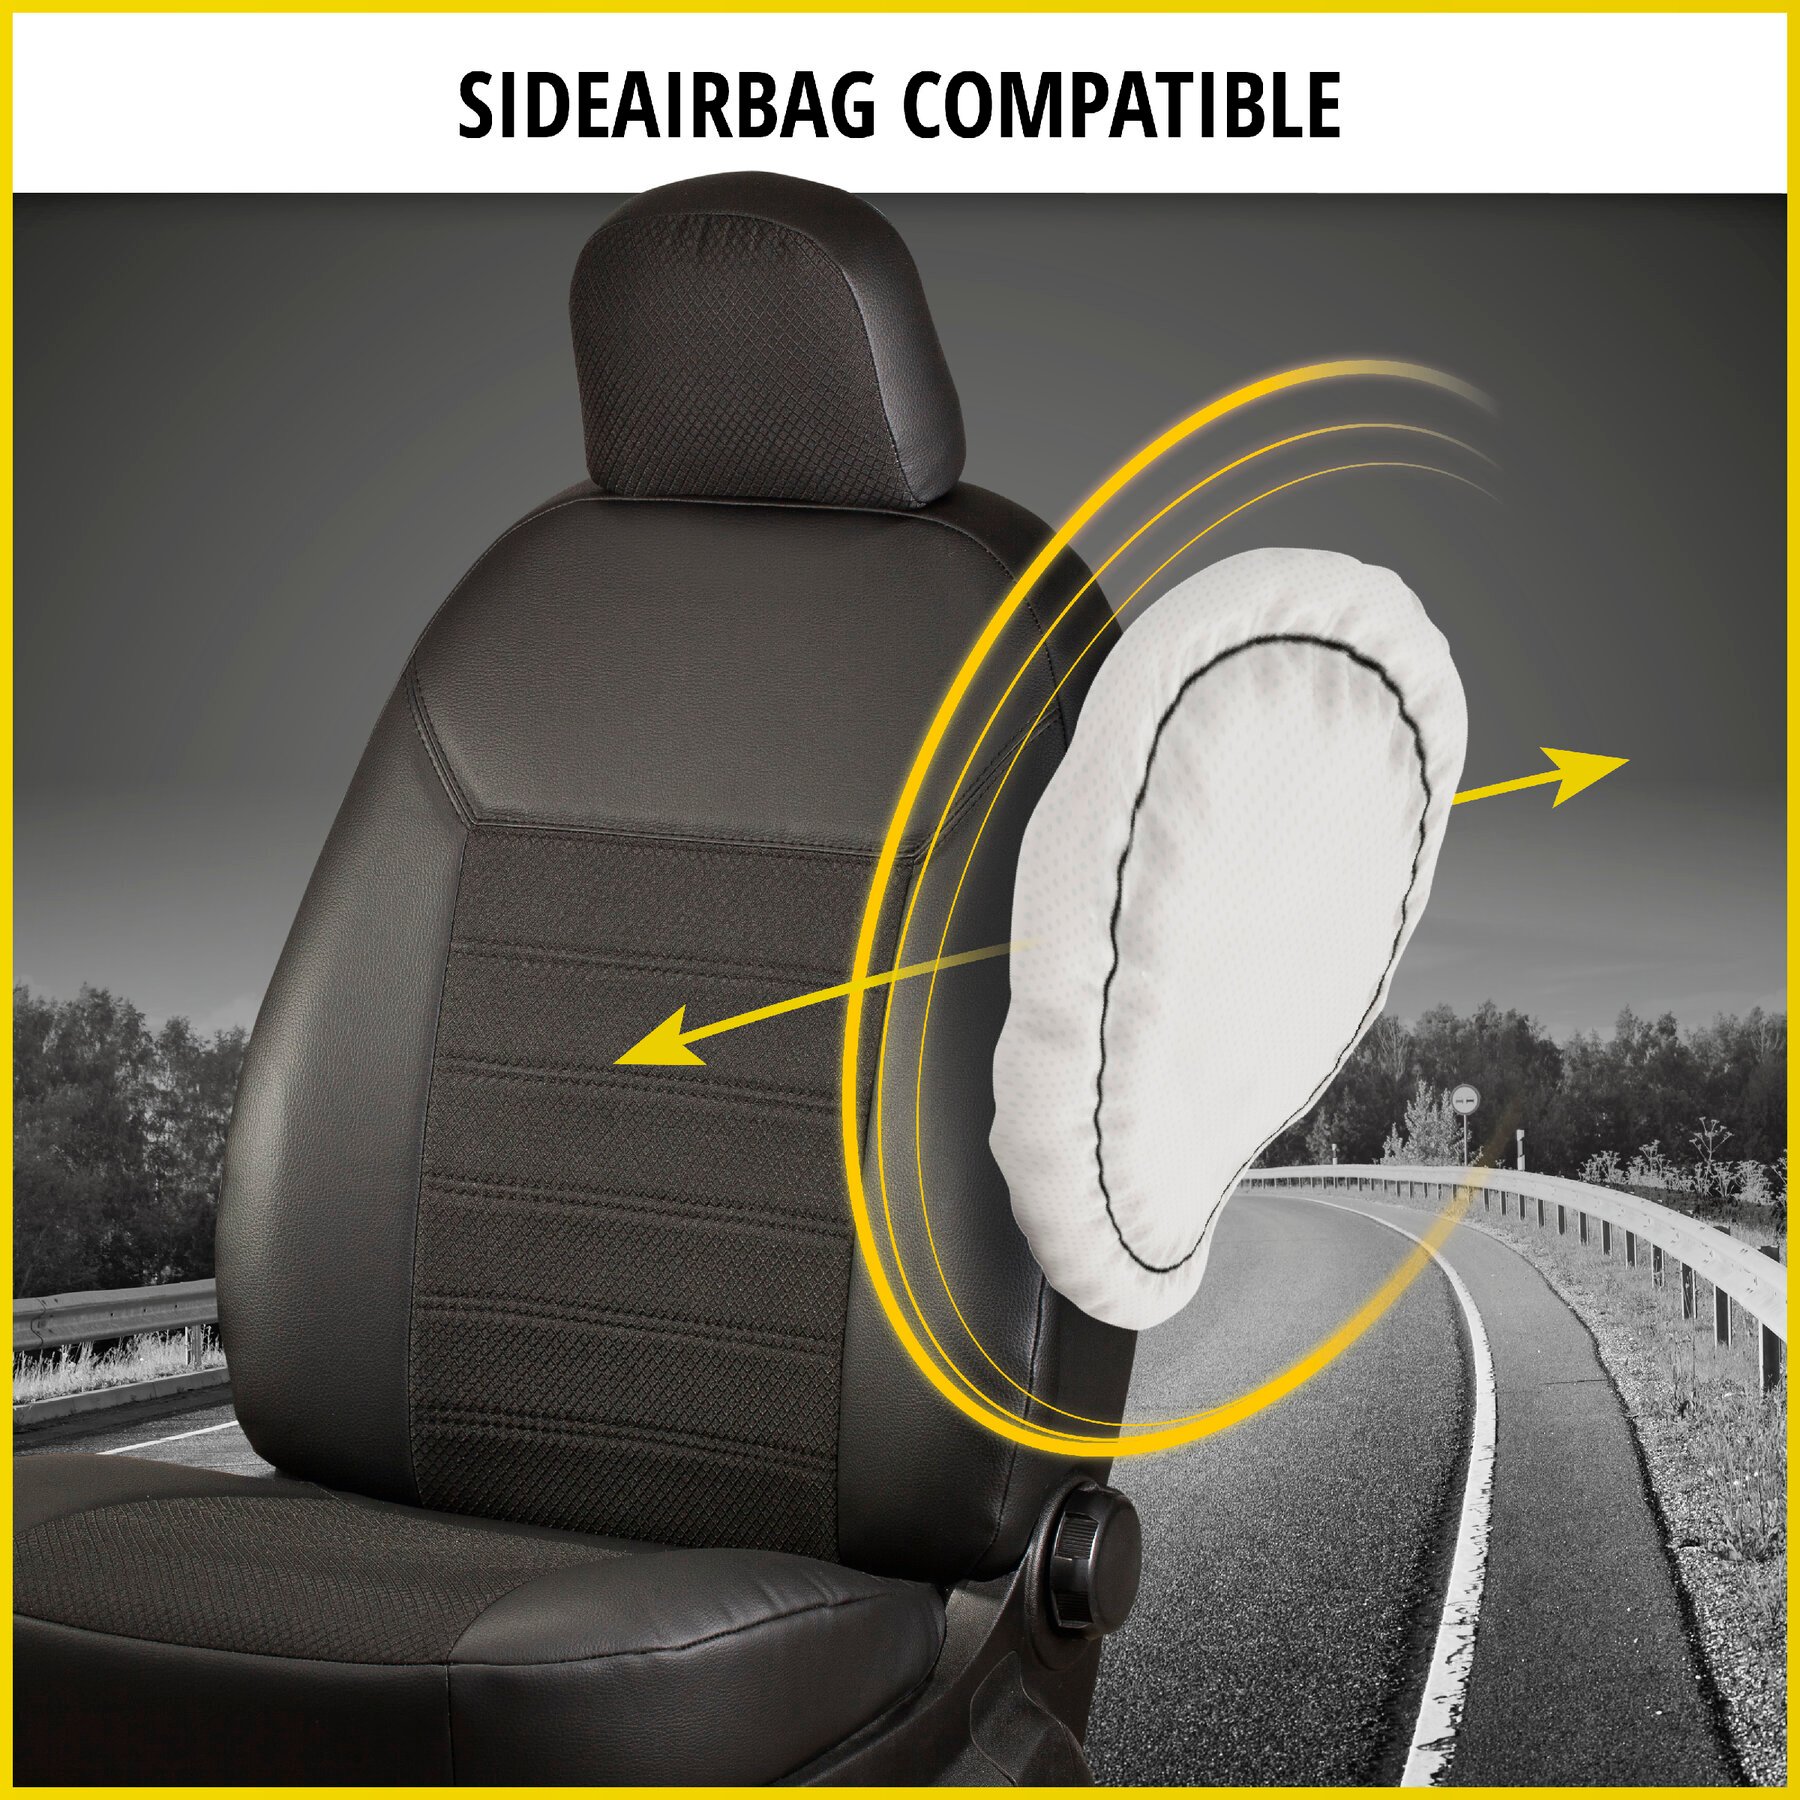 Premium Seat Cover for Fiat Ducato 07/2006-Today, 2 single seat covers front + 2 armrest covers